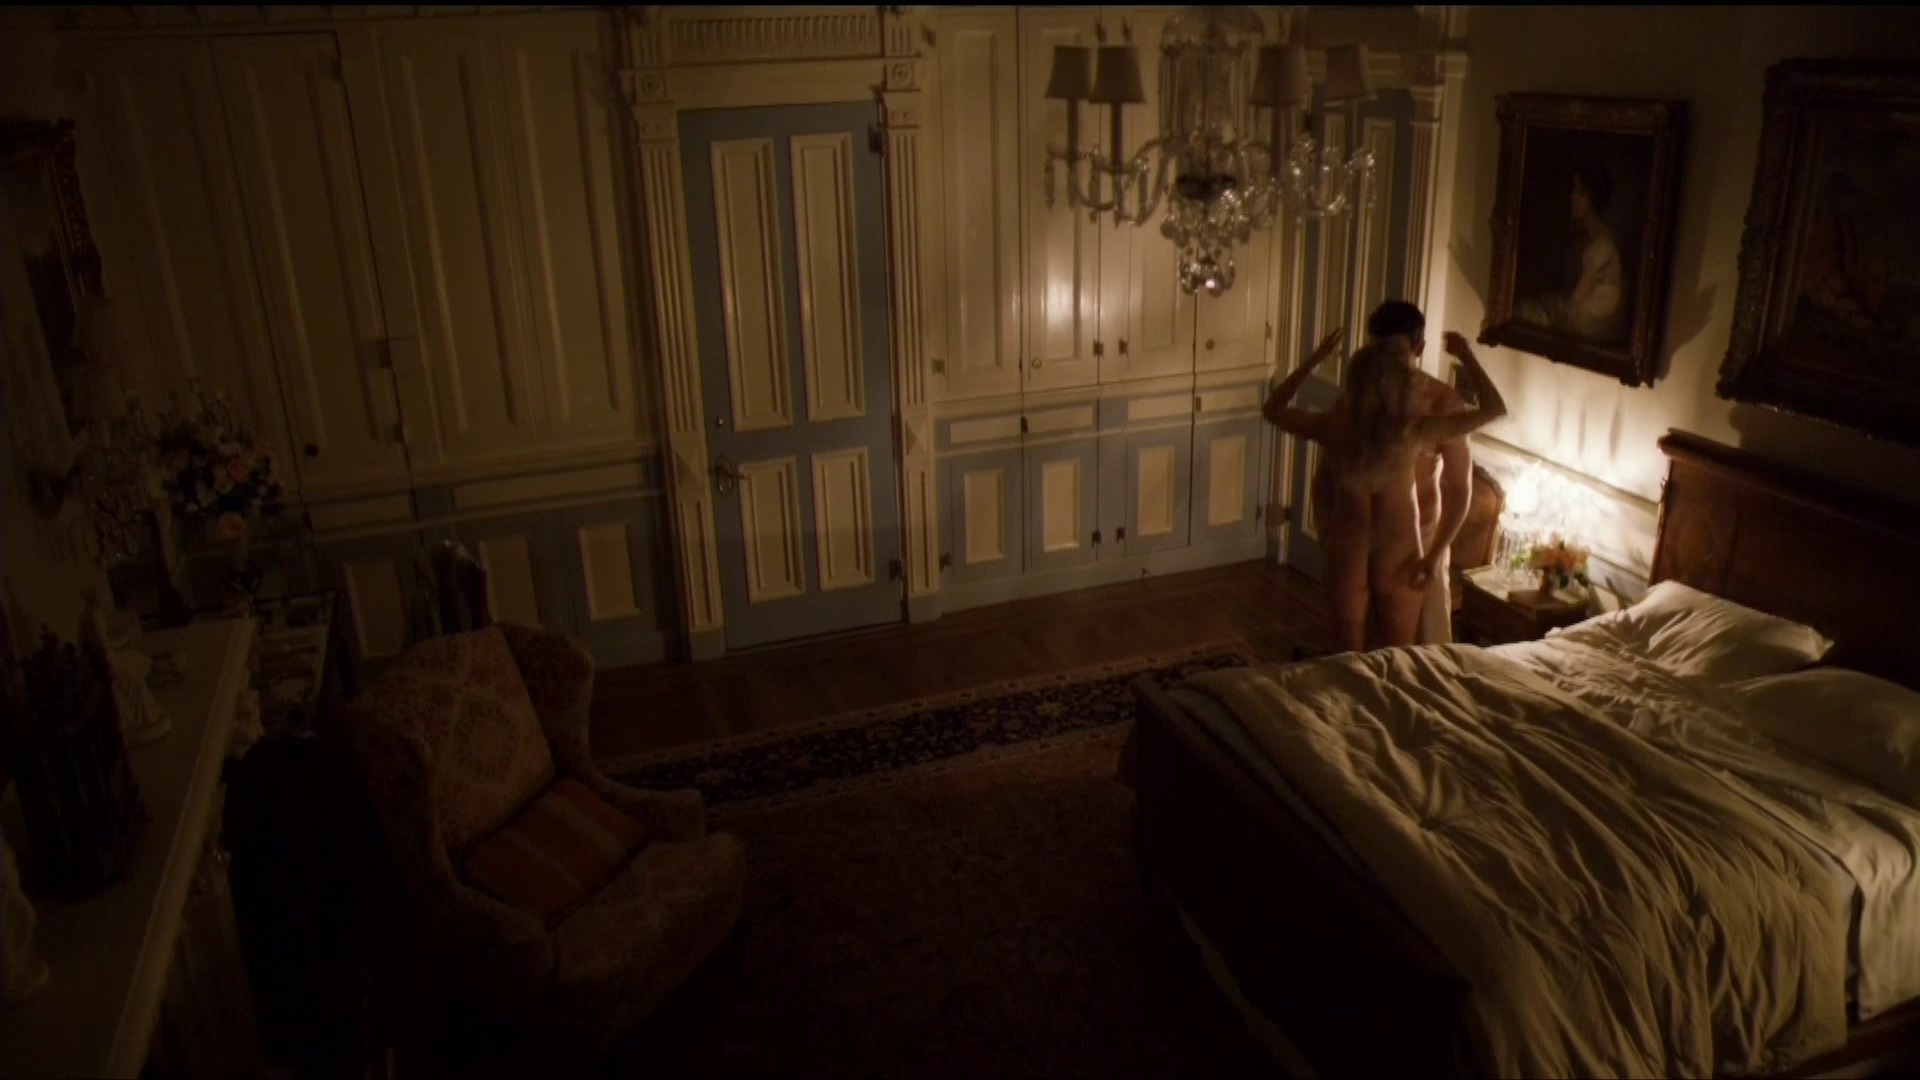 Juliet Rylance fully naked in the bedroon, movie stills from the Knick